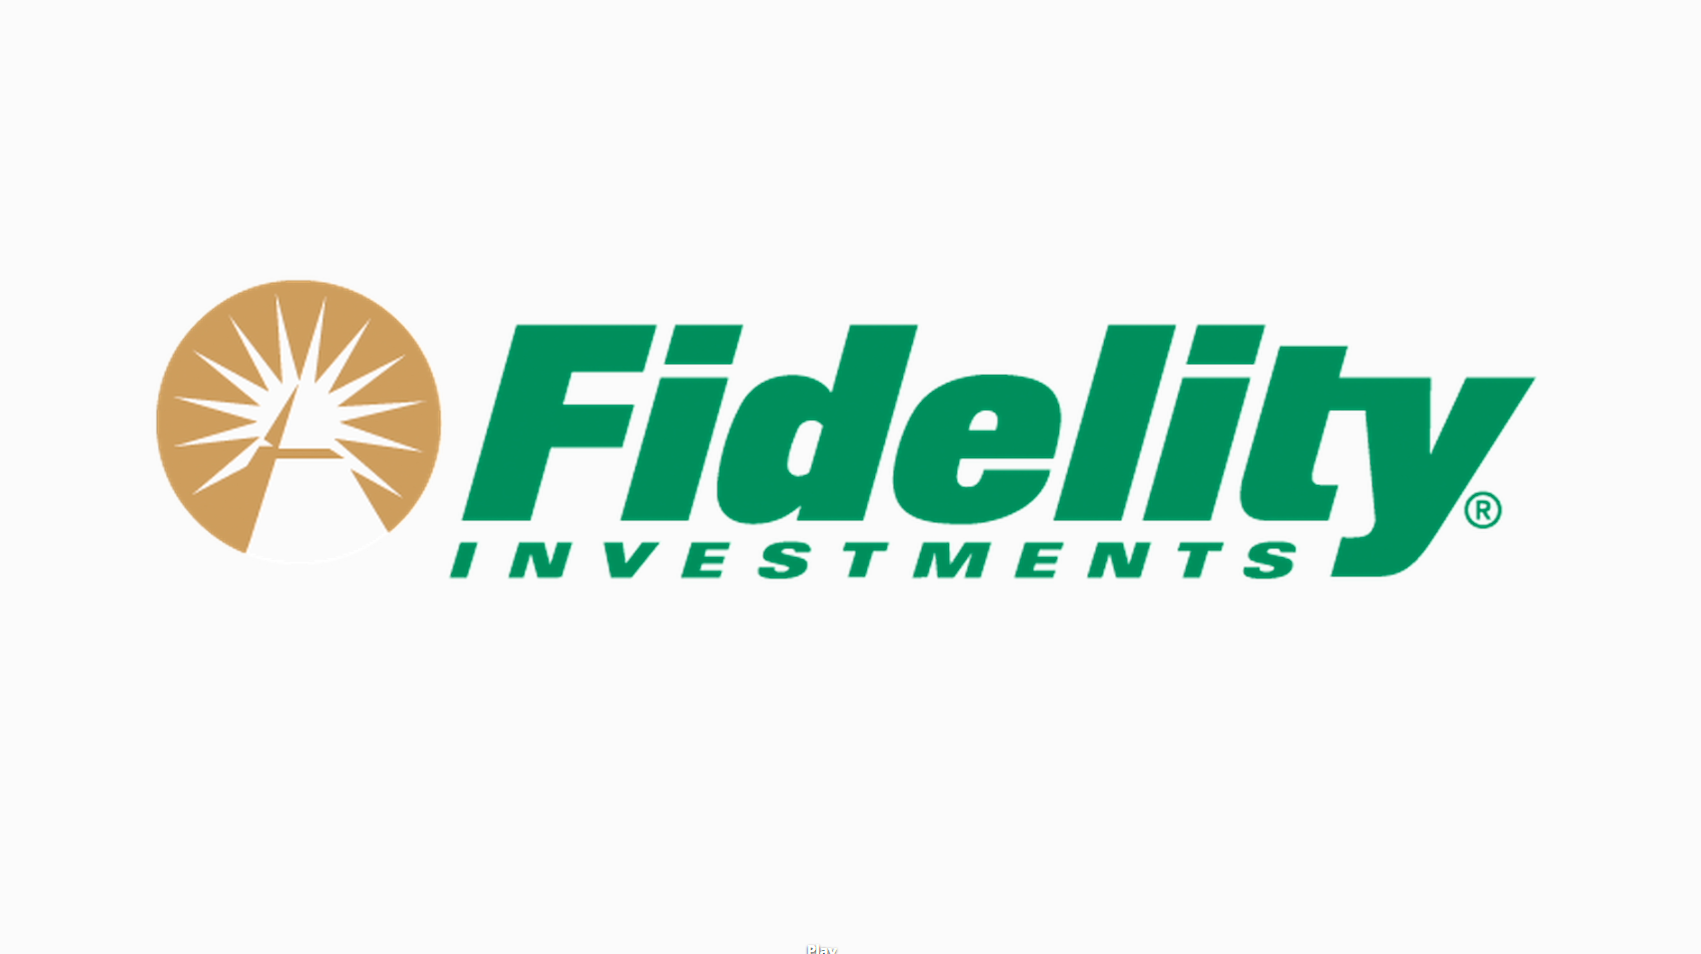 Fidelity Review